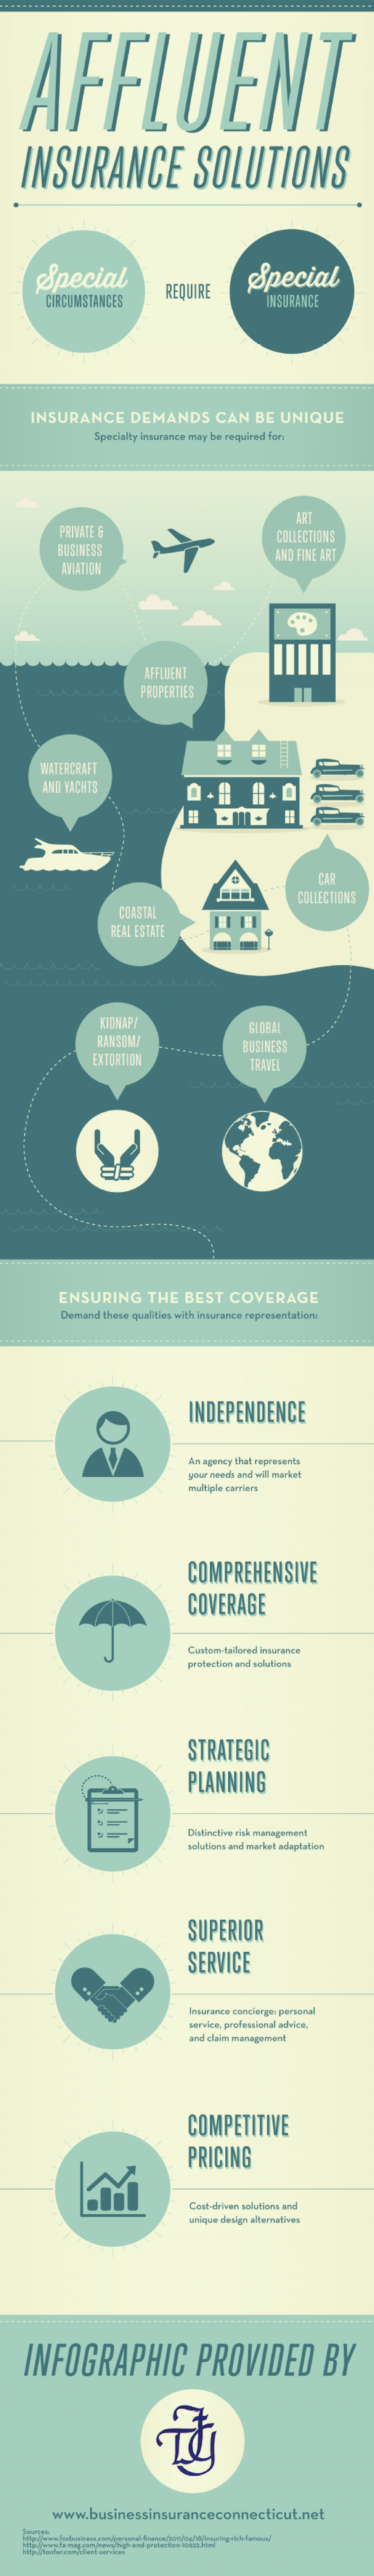 Affluent Insurance Solutions Infographic